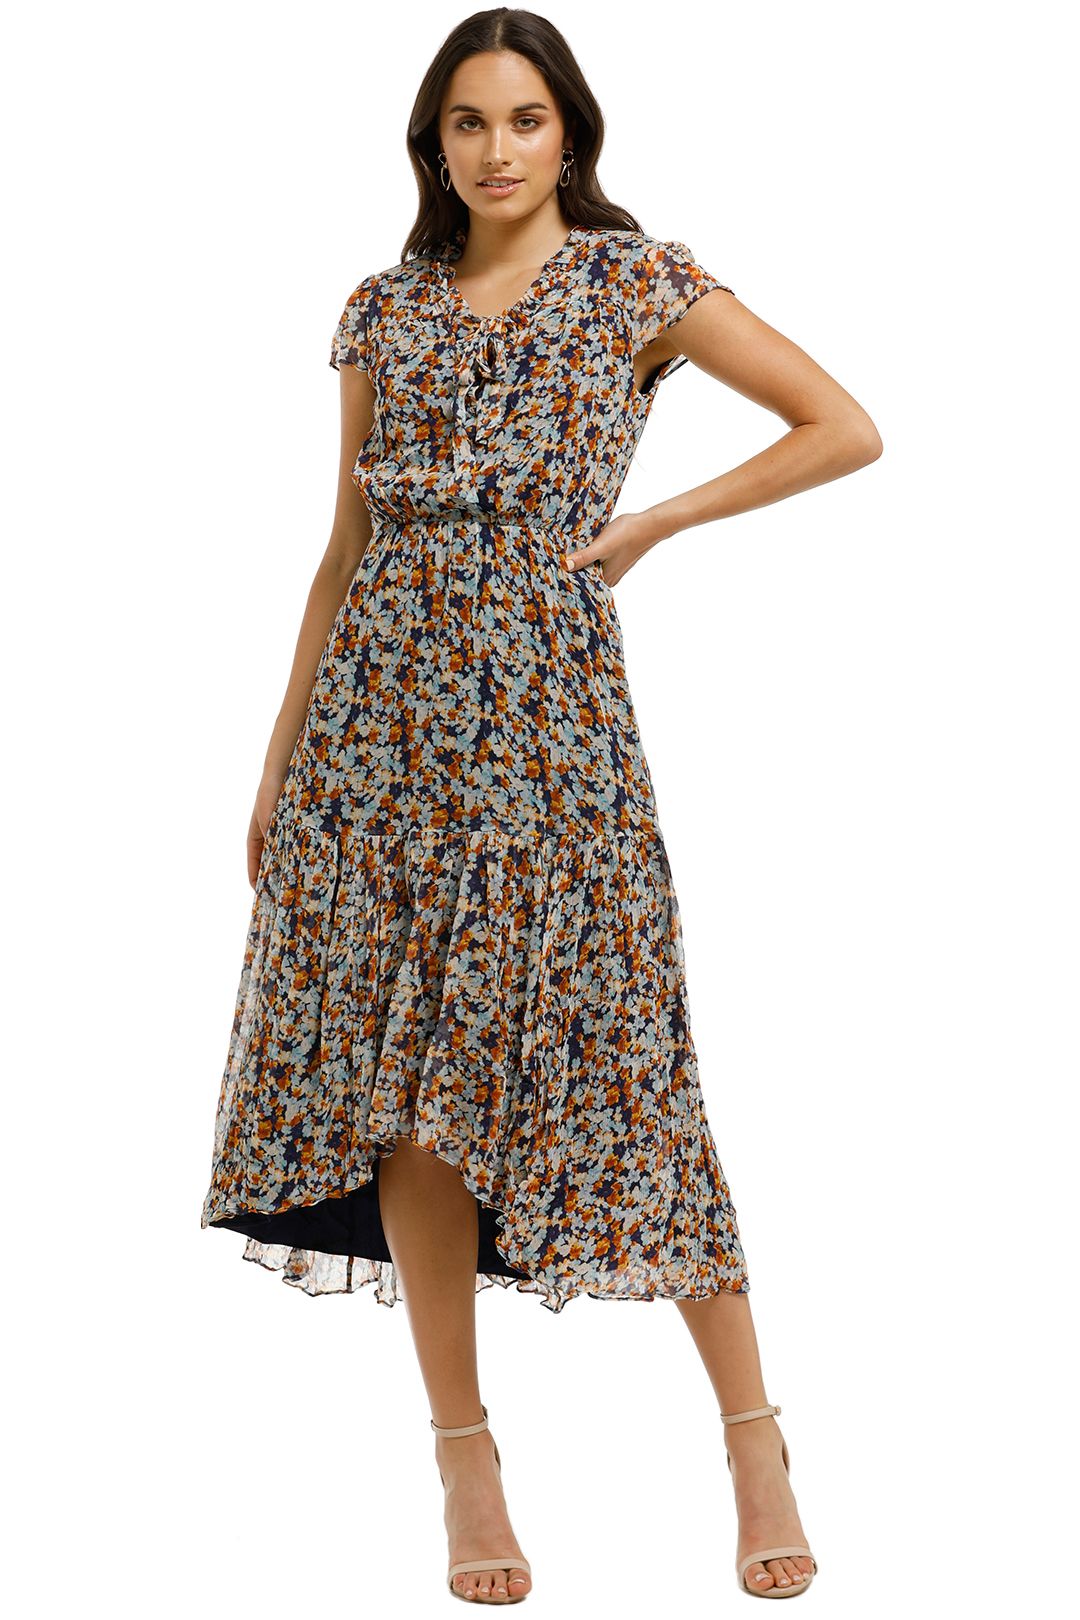 Stevie-May-Dixie-Midi-Dress-Dixie-Cup-Floral-Front